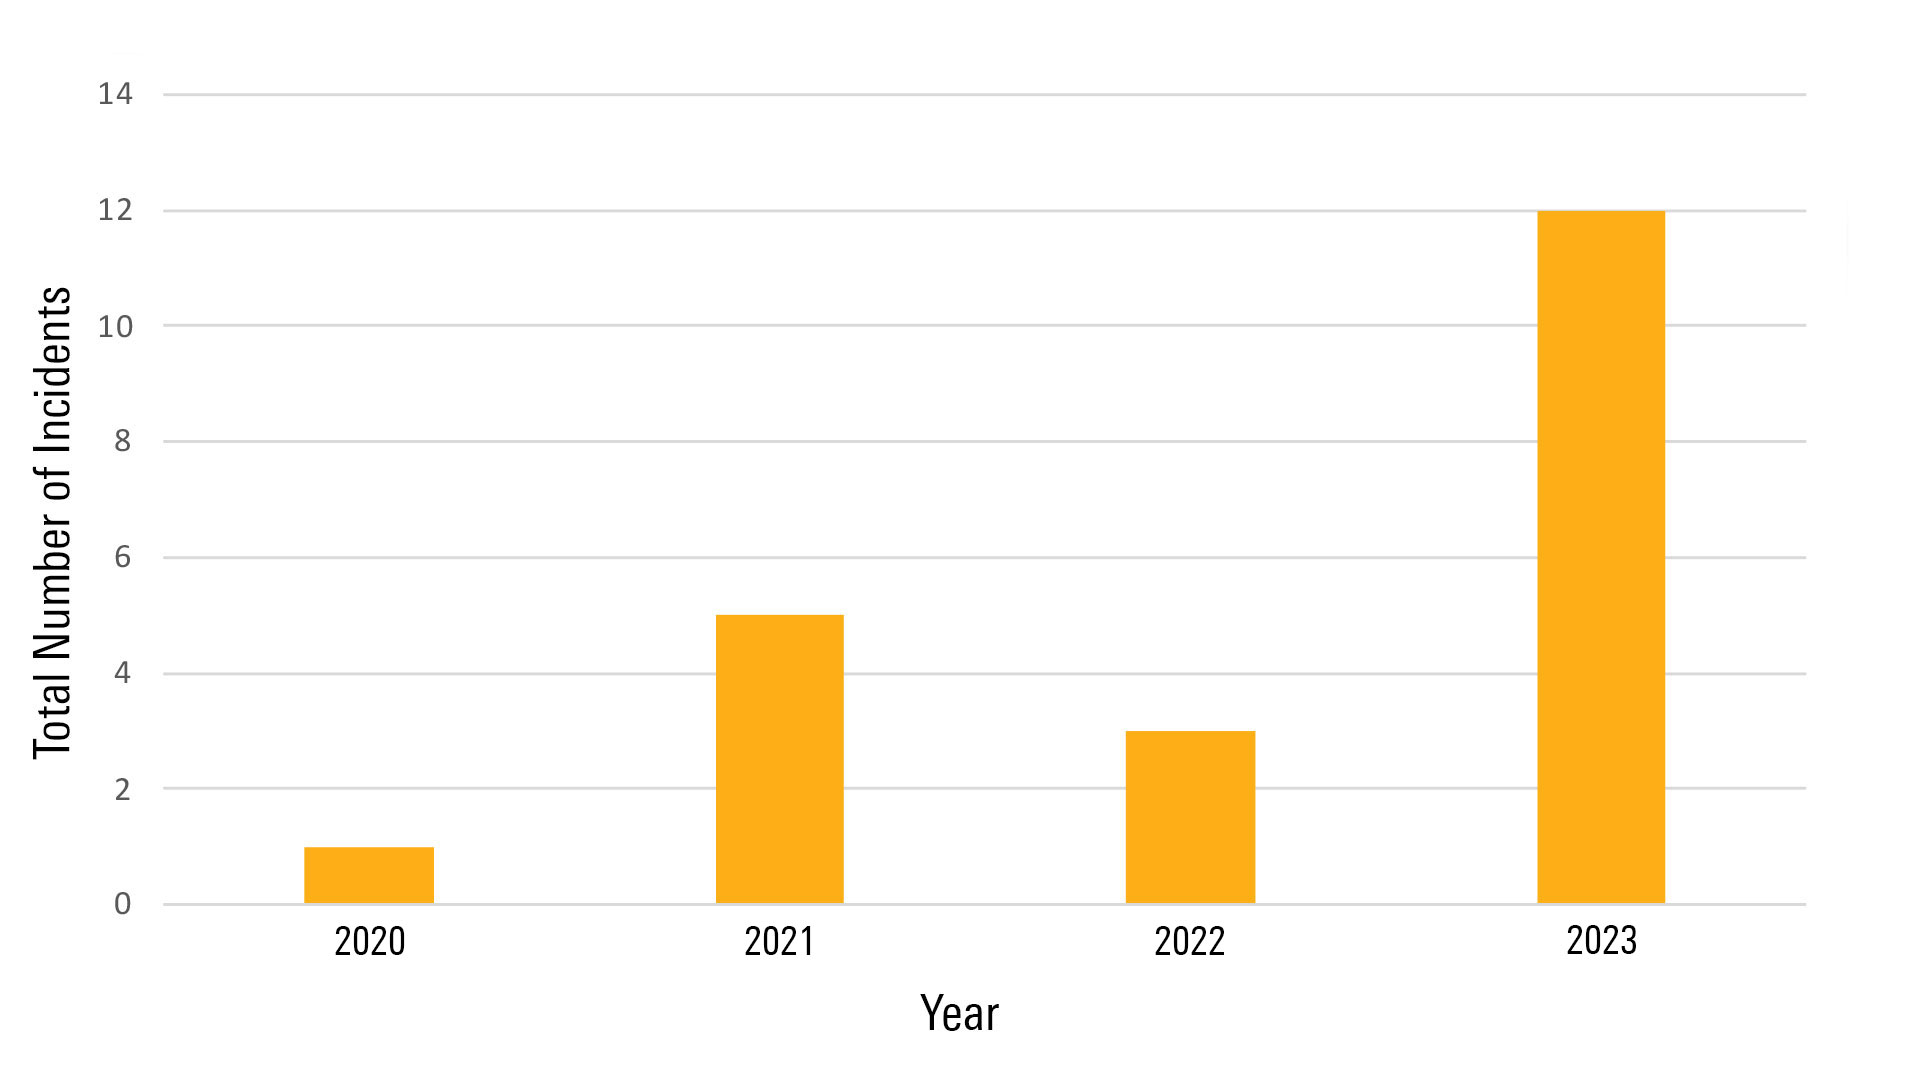 Figure 1. Probes and Litigation Incidents Related to the Environmental and Carbon Impact of Products in the Banking Industry 2020 – 2023